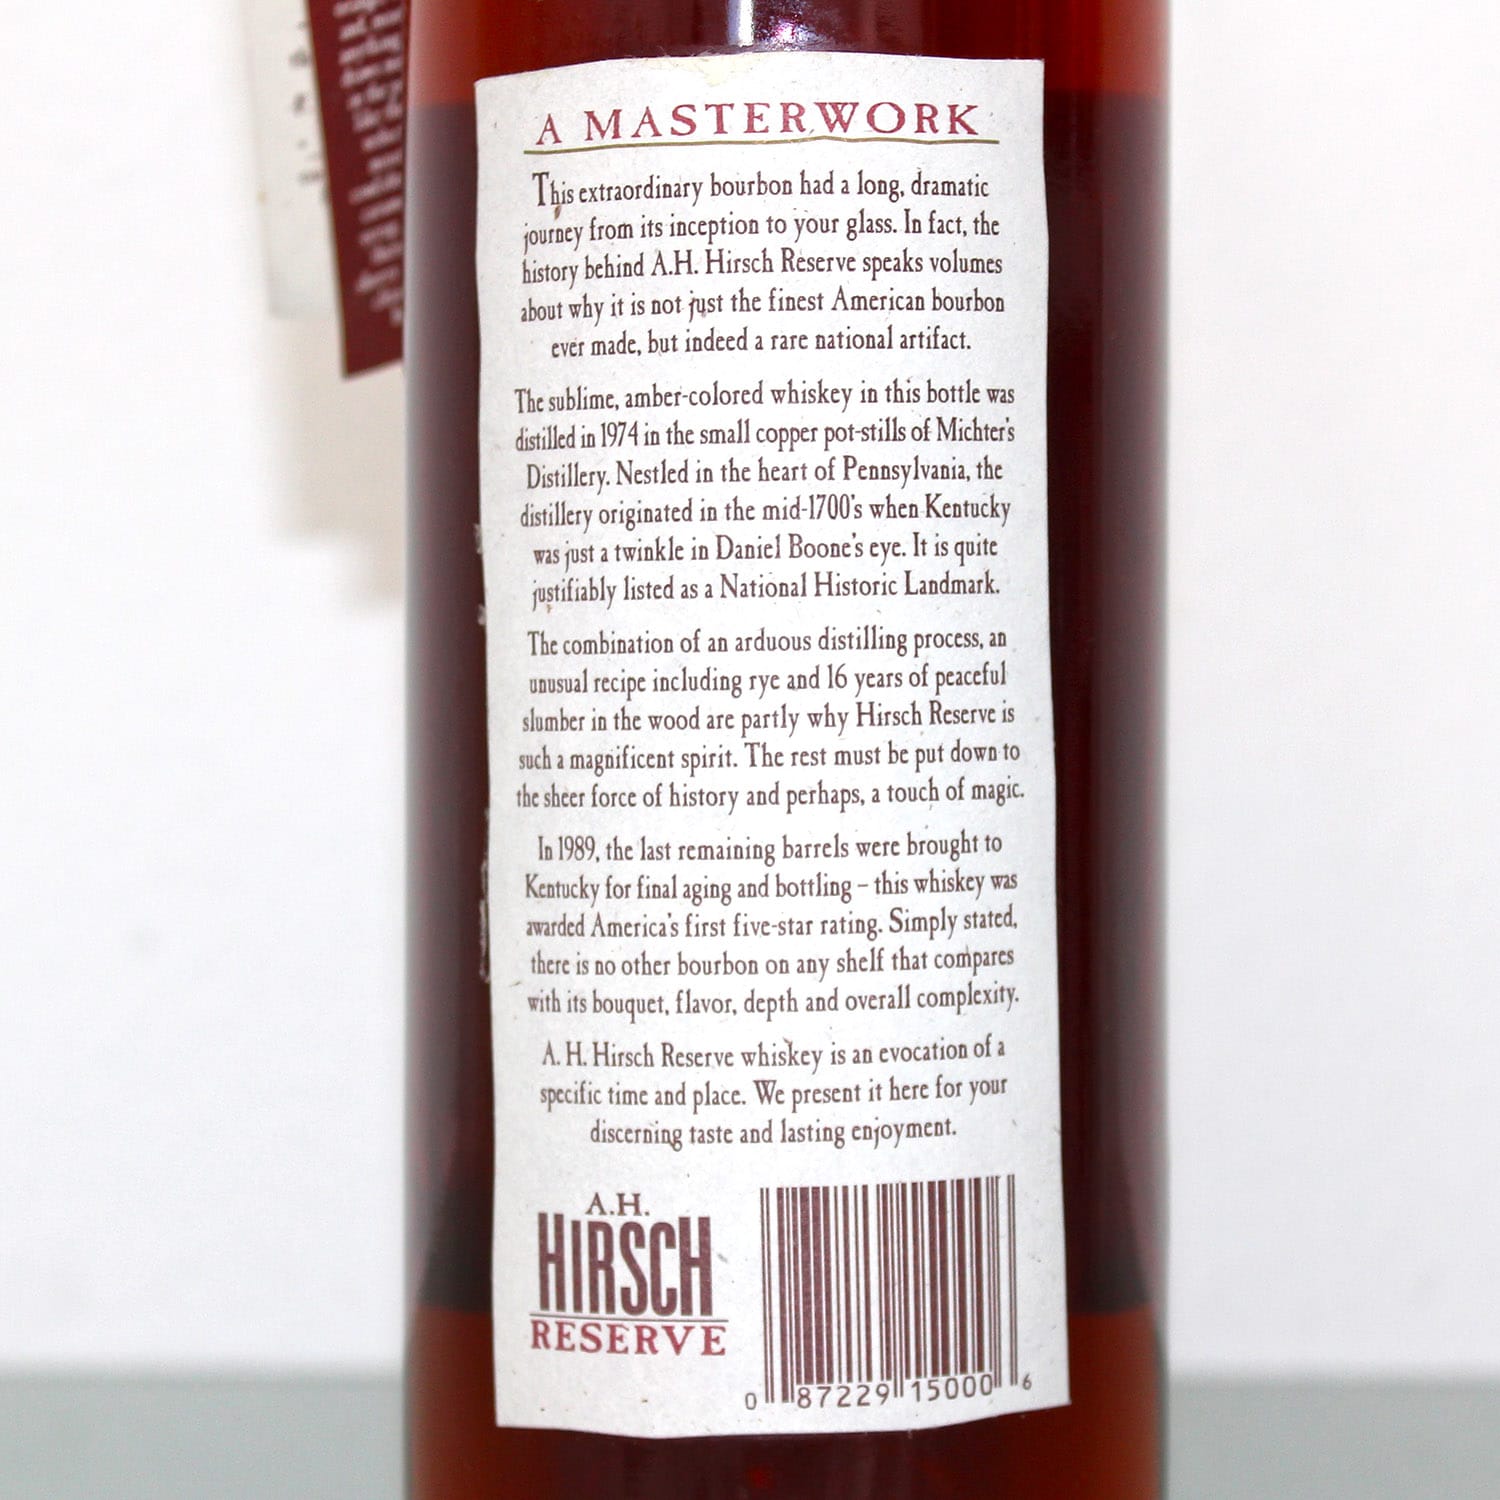 A.H. Hirsch Reserve 1974 16 Years Old back label